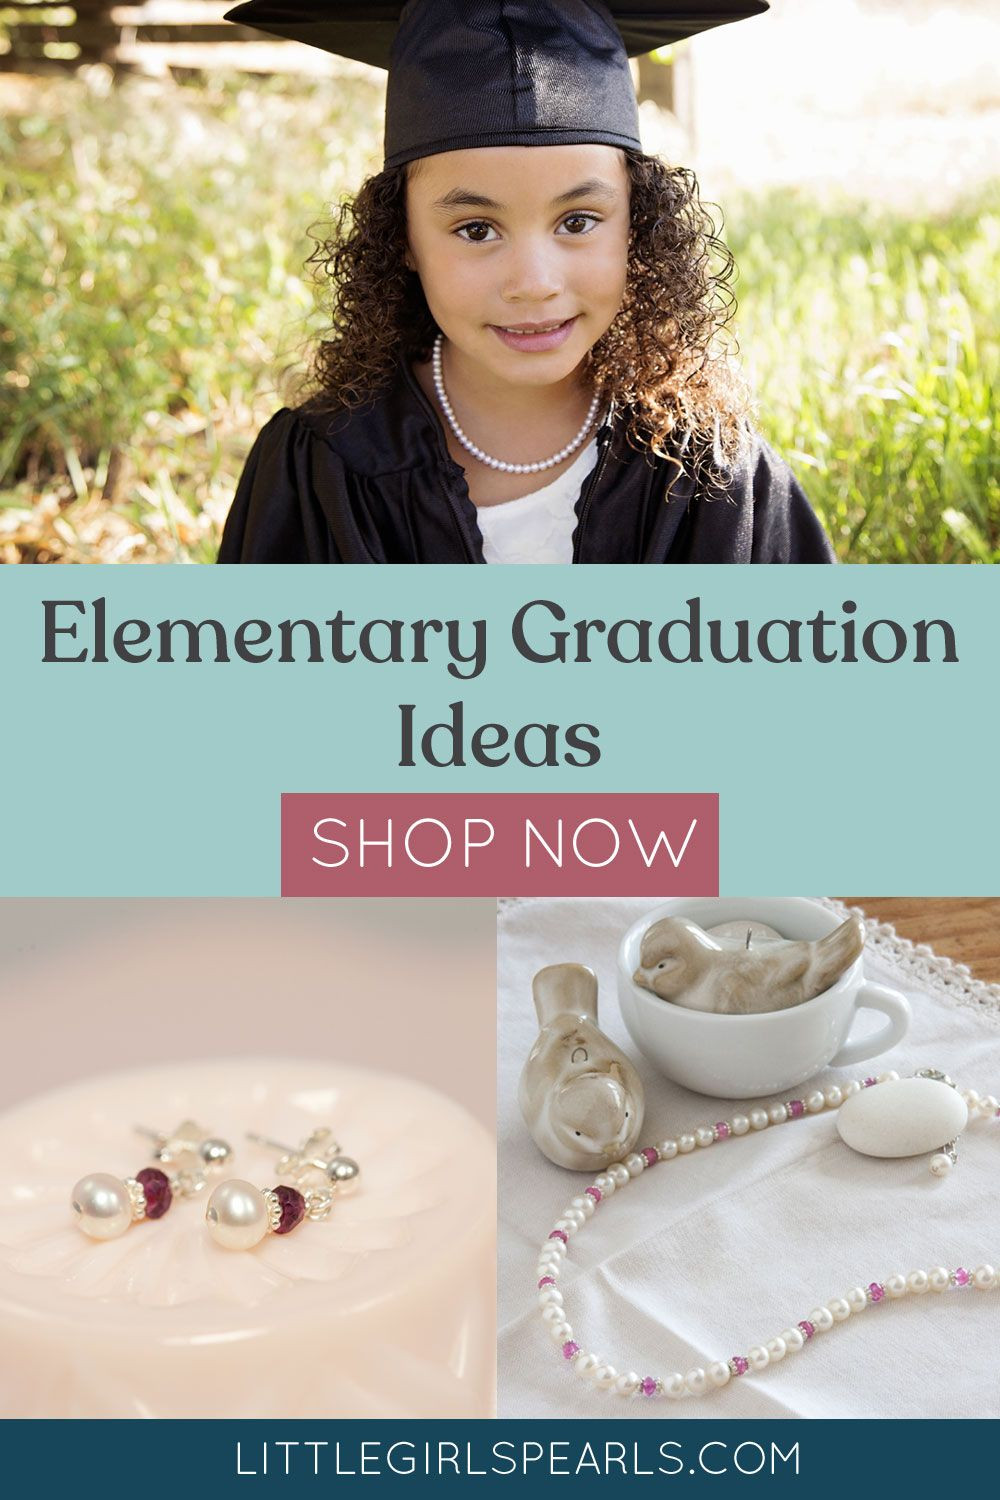 Elementary Graduation Gift Ideas For Her
 Is the little girl in your life ting ready to graduate